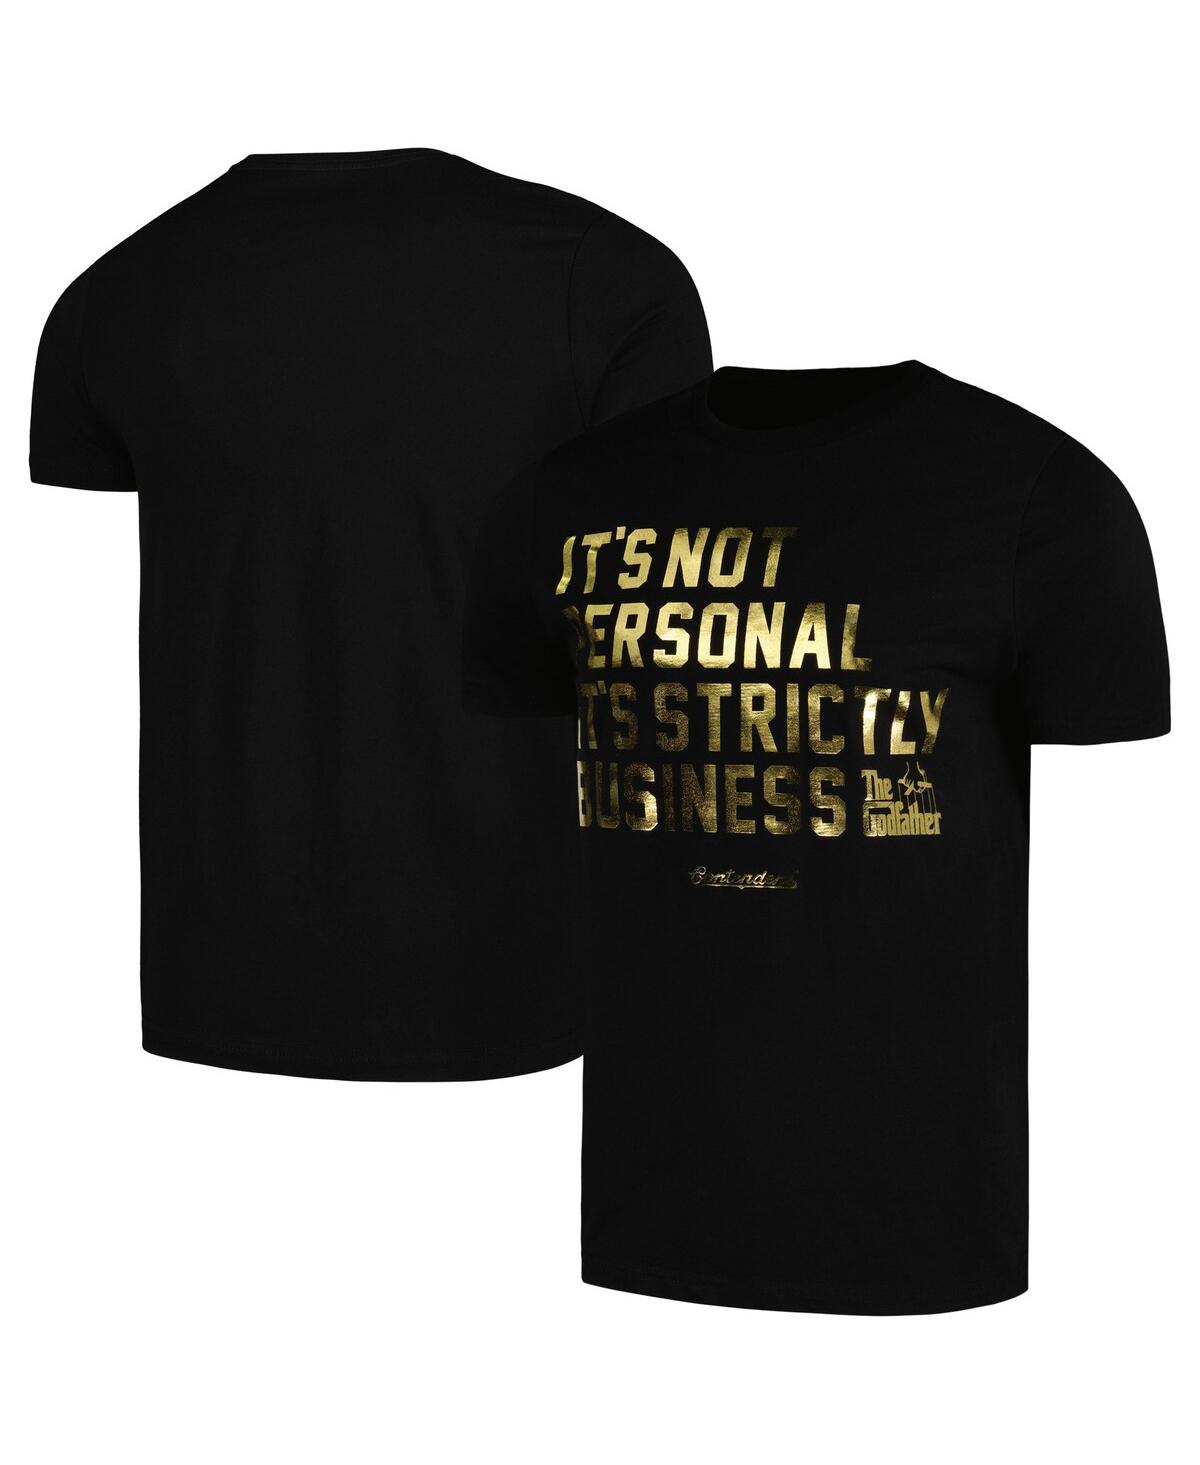 Men's Contenders Clothing Black The Godfather Strictly Business T-shirt - Black